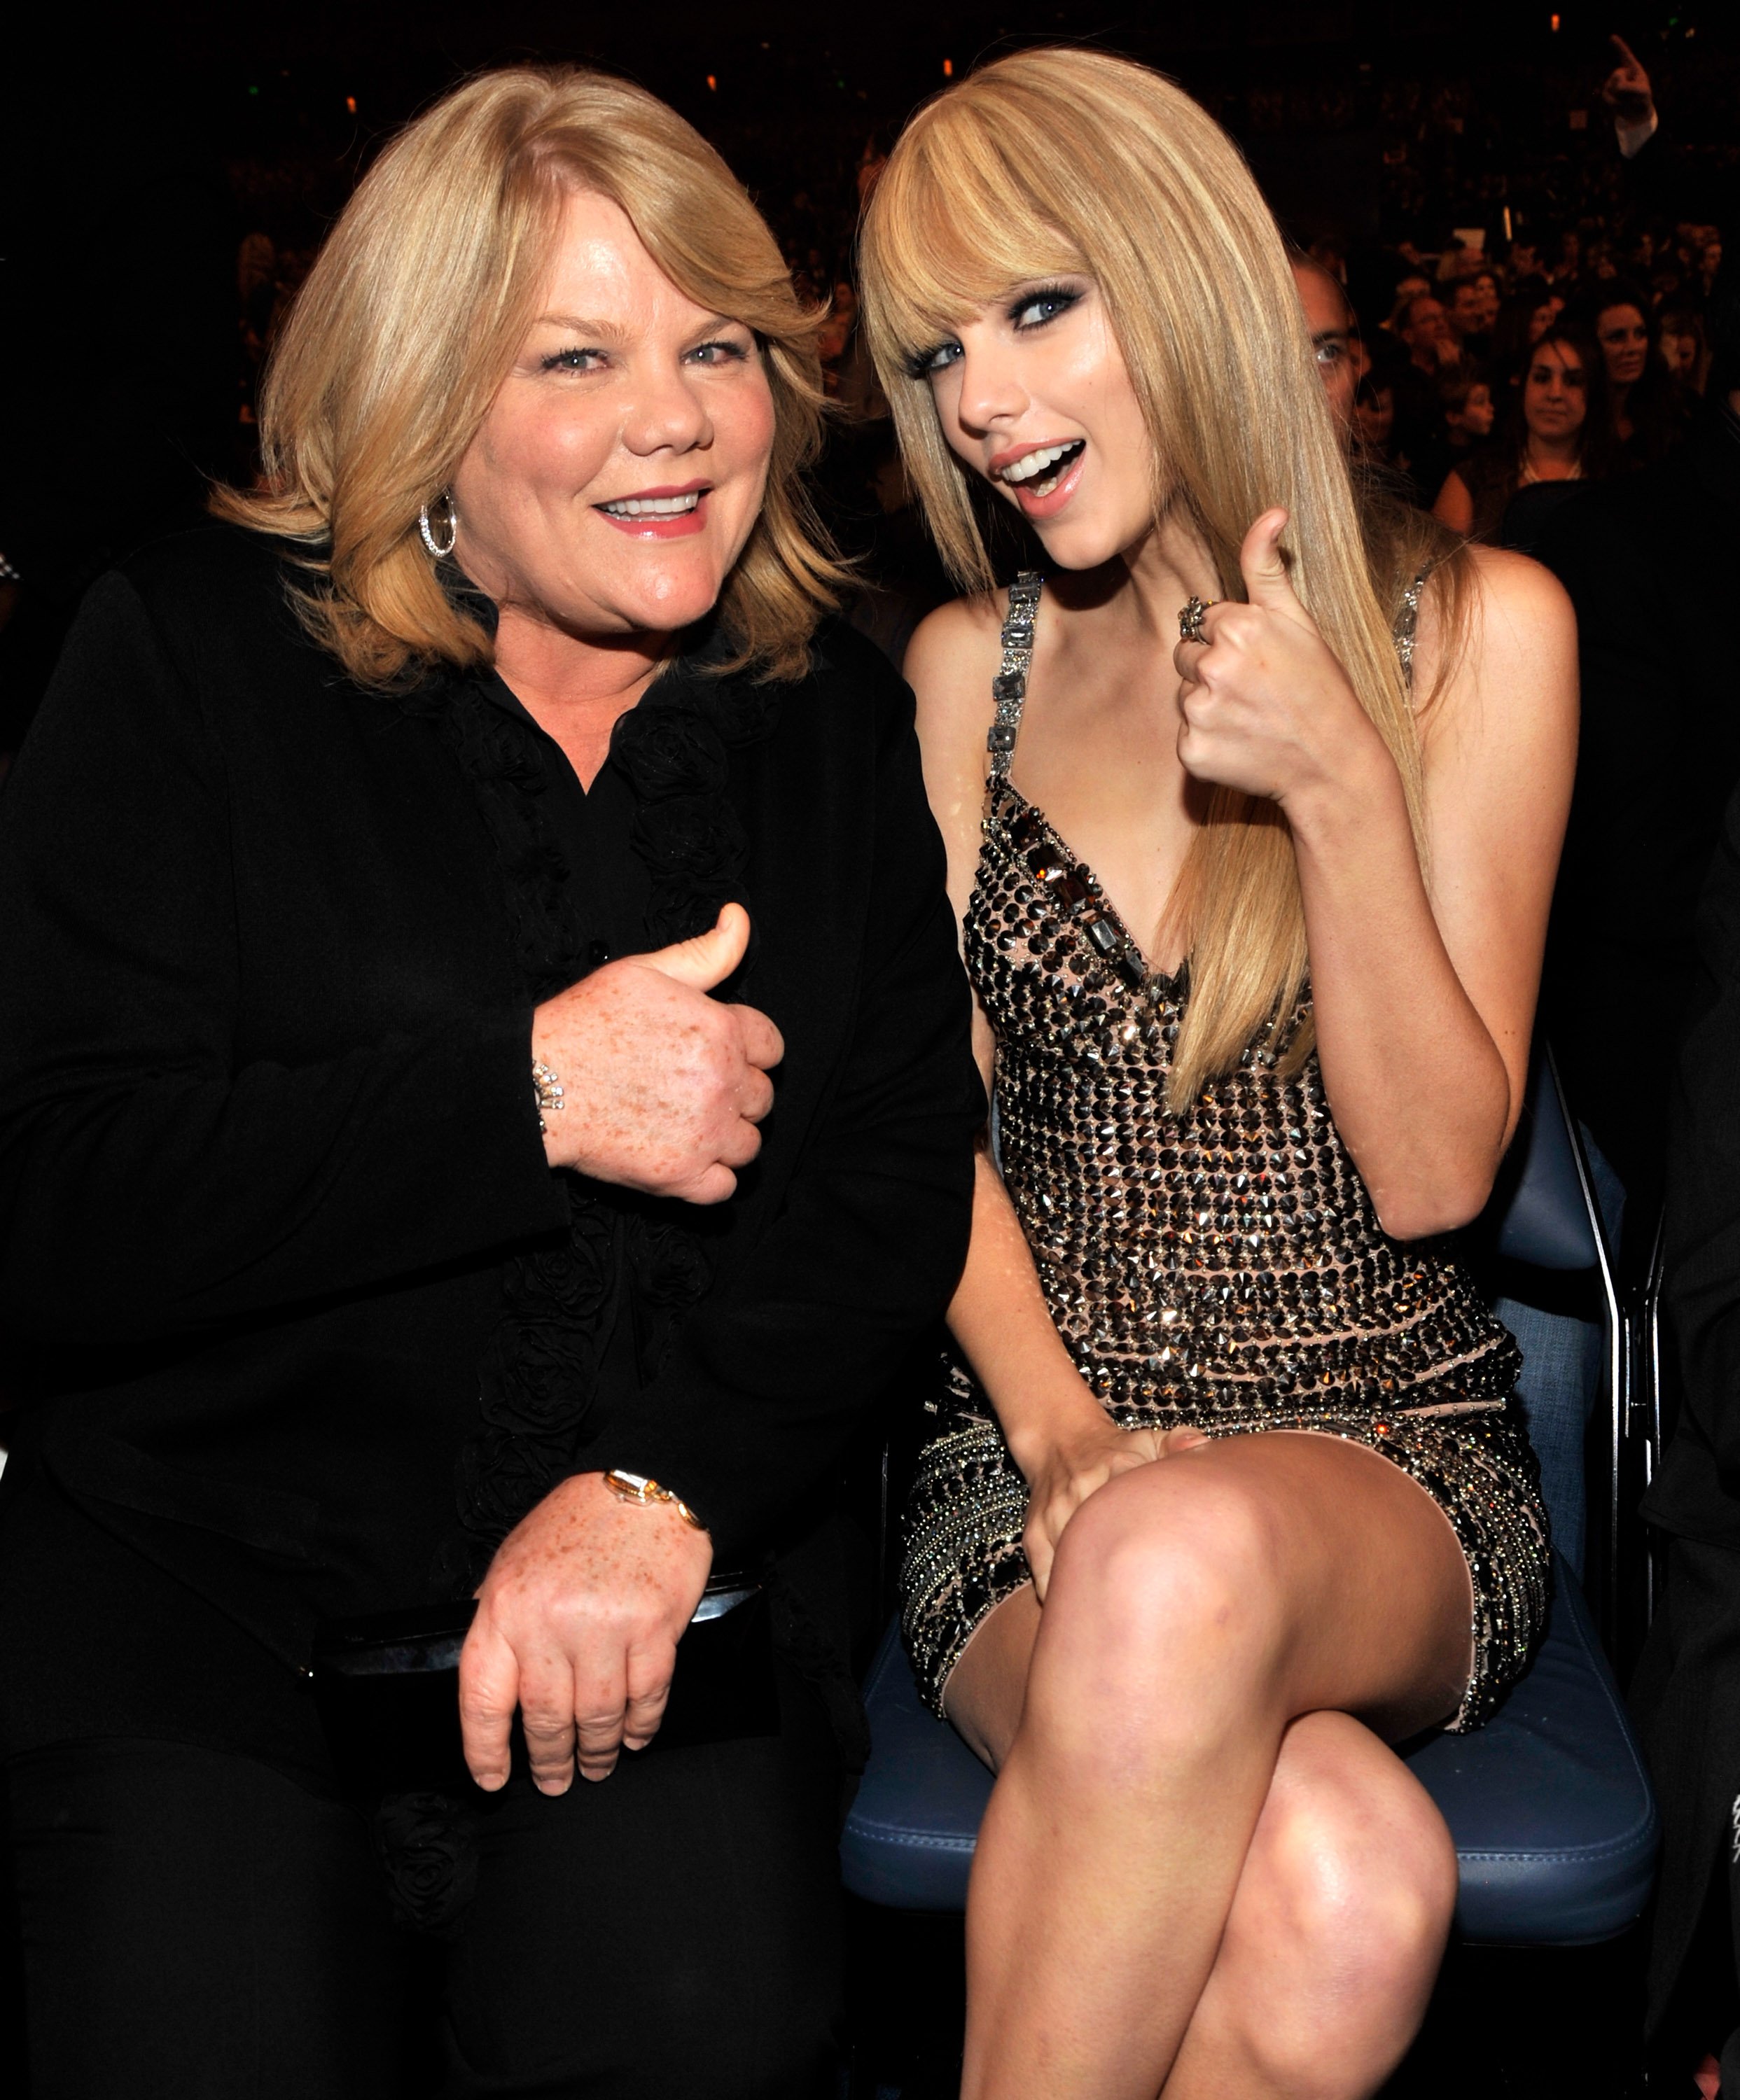 Andrea Swift and Taylor Swift during the 2010 American Music Awards held at Nokia Theatre L.A. Live on November 21, 2010, in Los Angeles, California. | Source: Getty Images